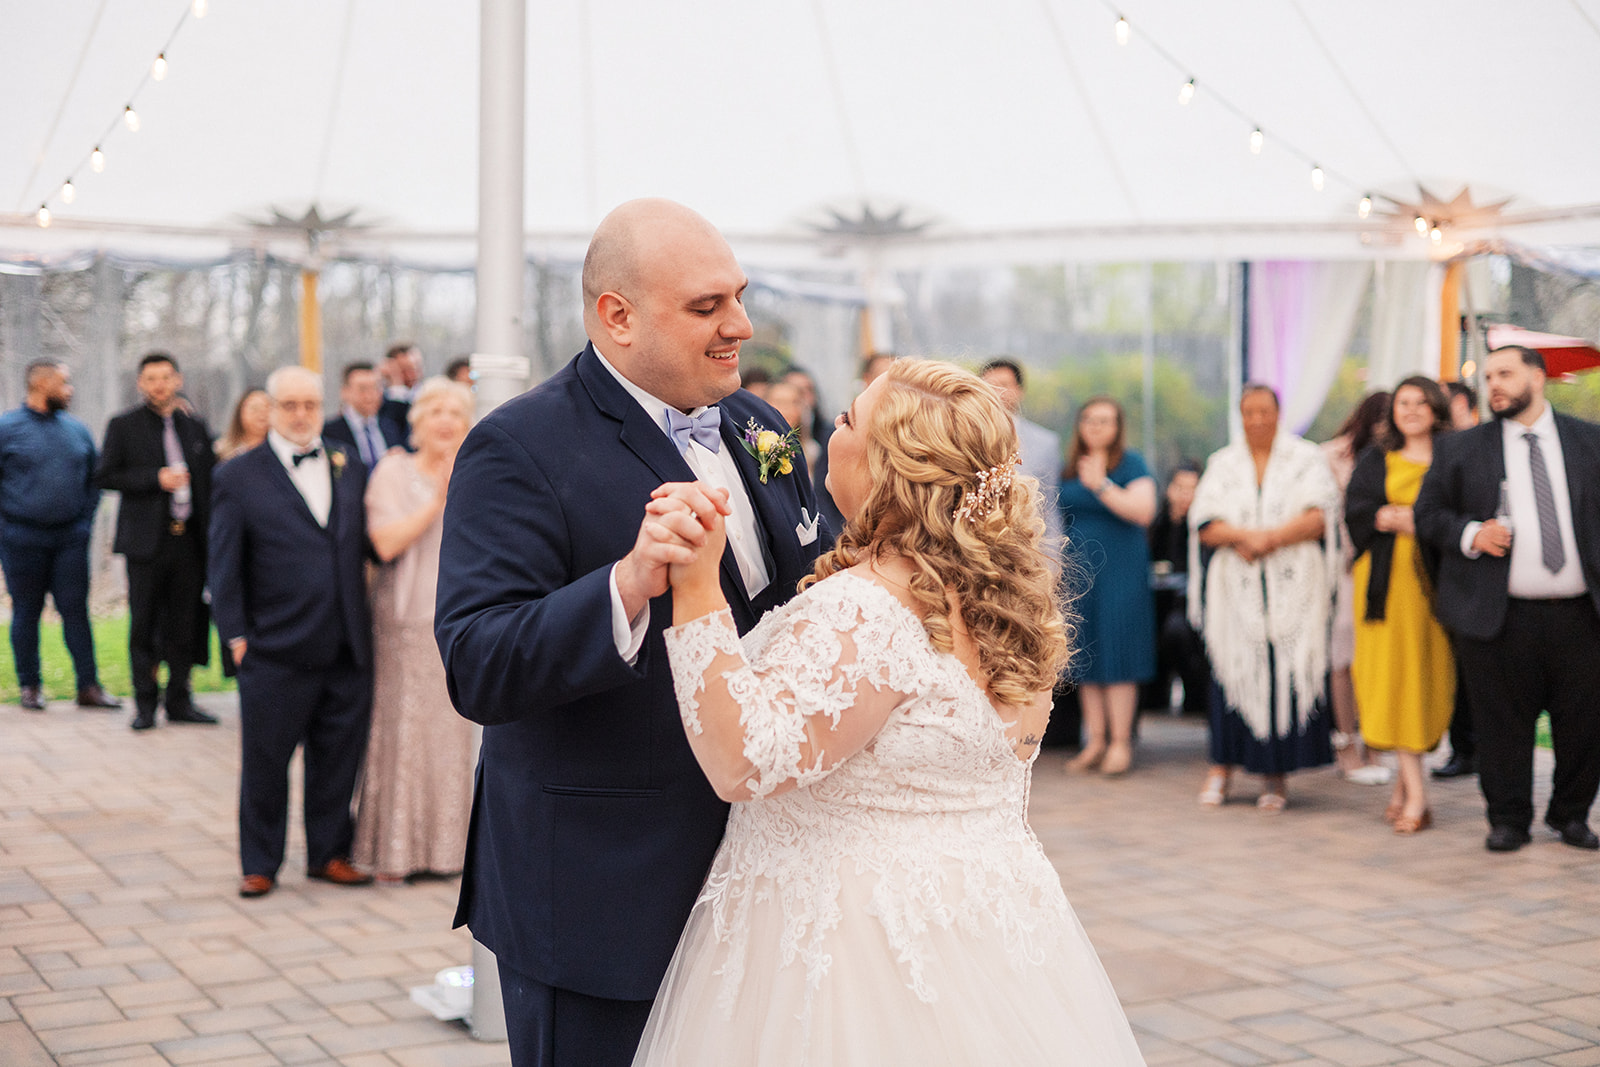 Newlyweds dance under a large white tent reception at their Forest Lodge Wedding